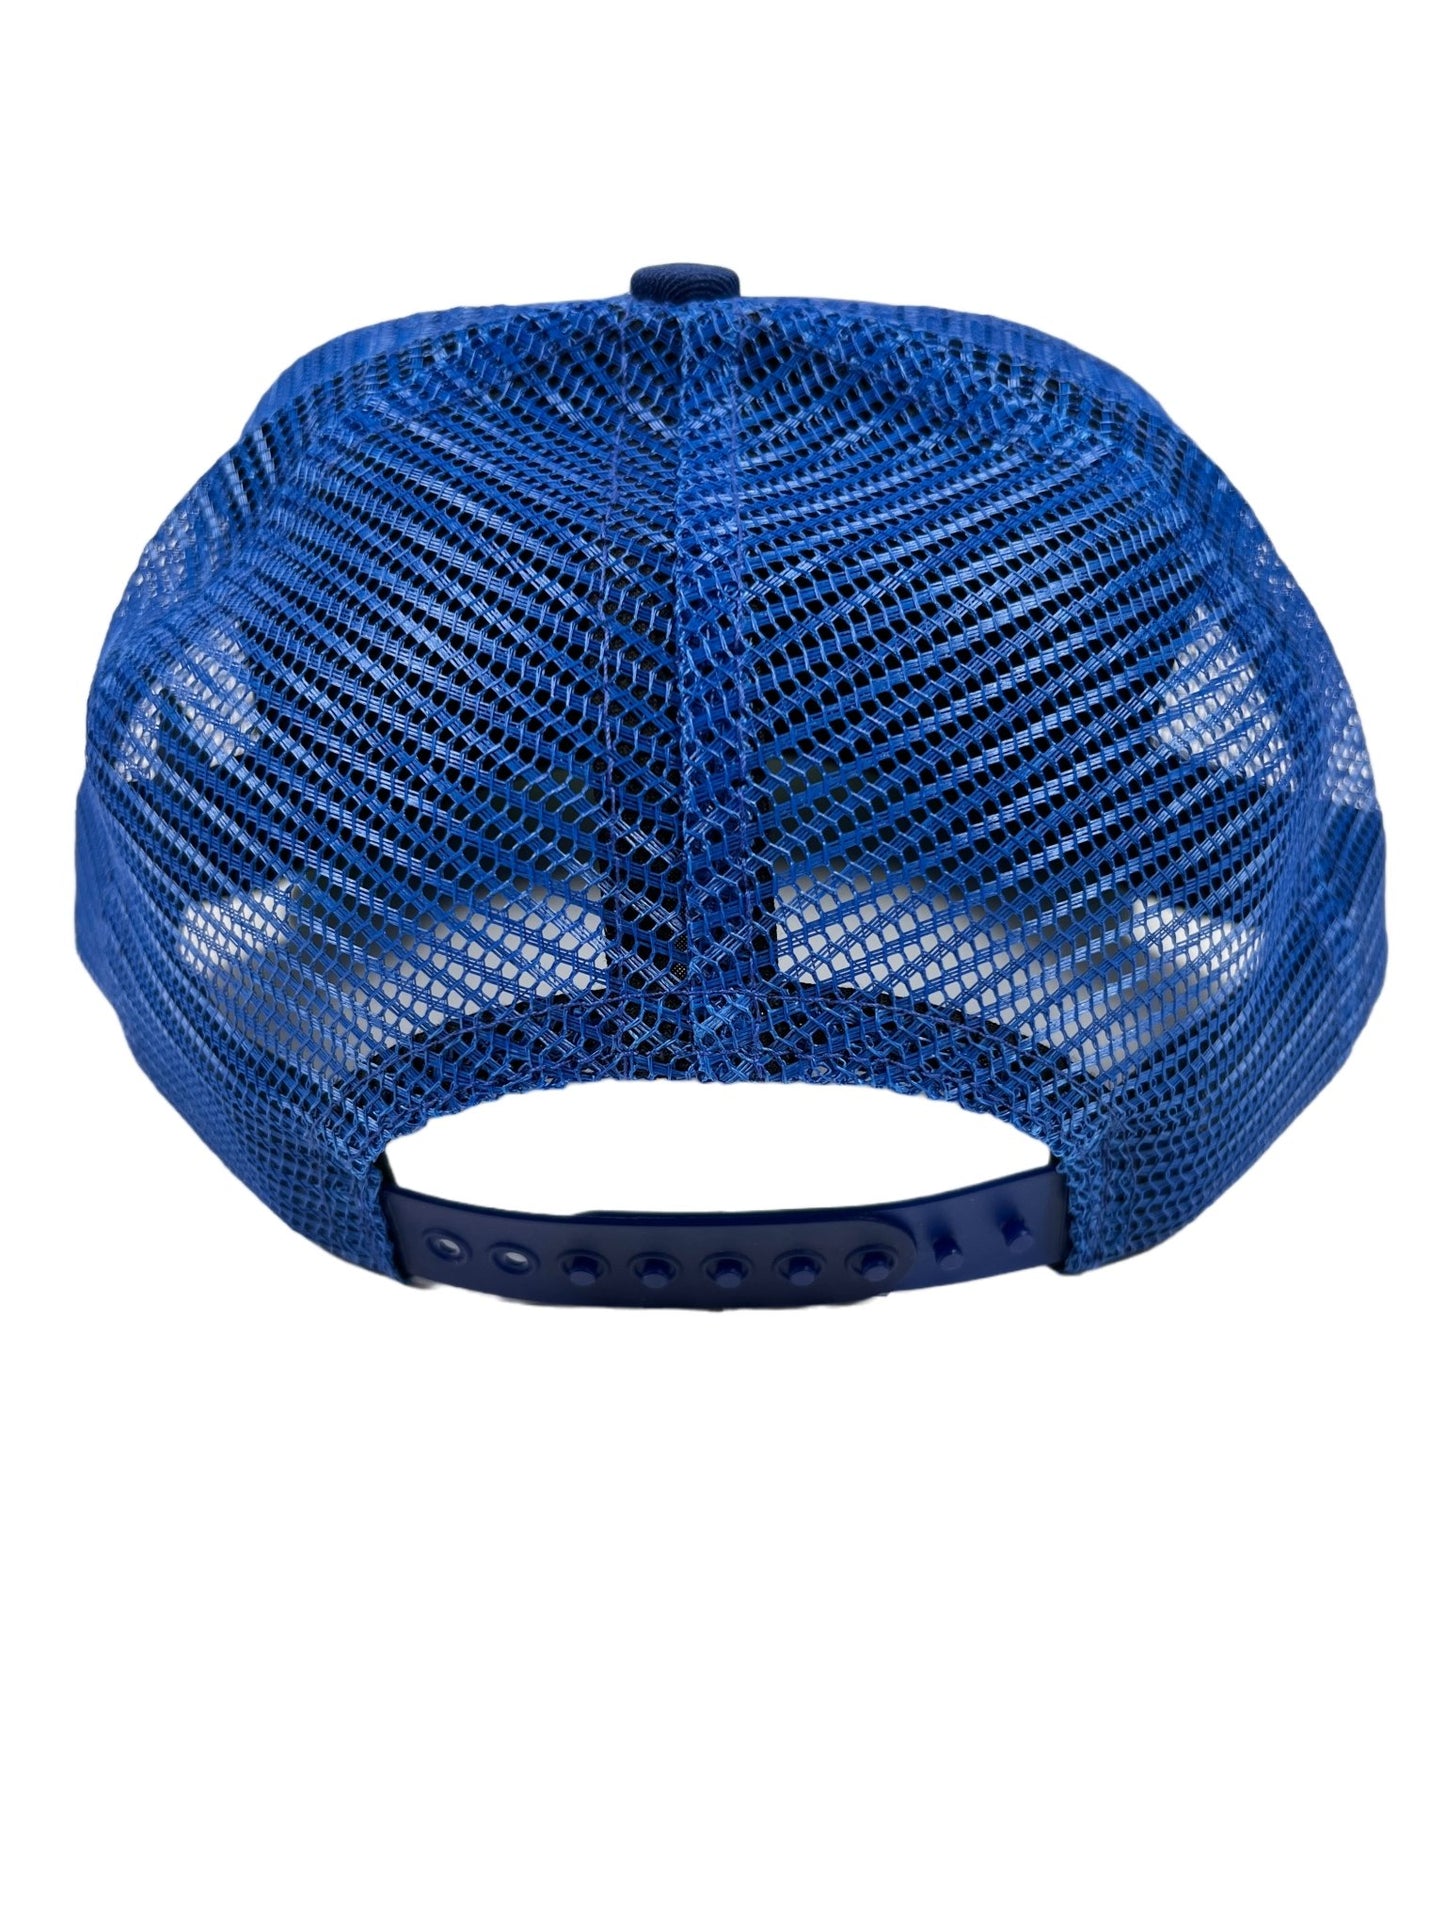 The back view of a cobalt blue mesh RHUDE DOUBLER trucker hat, embroidered.